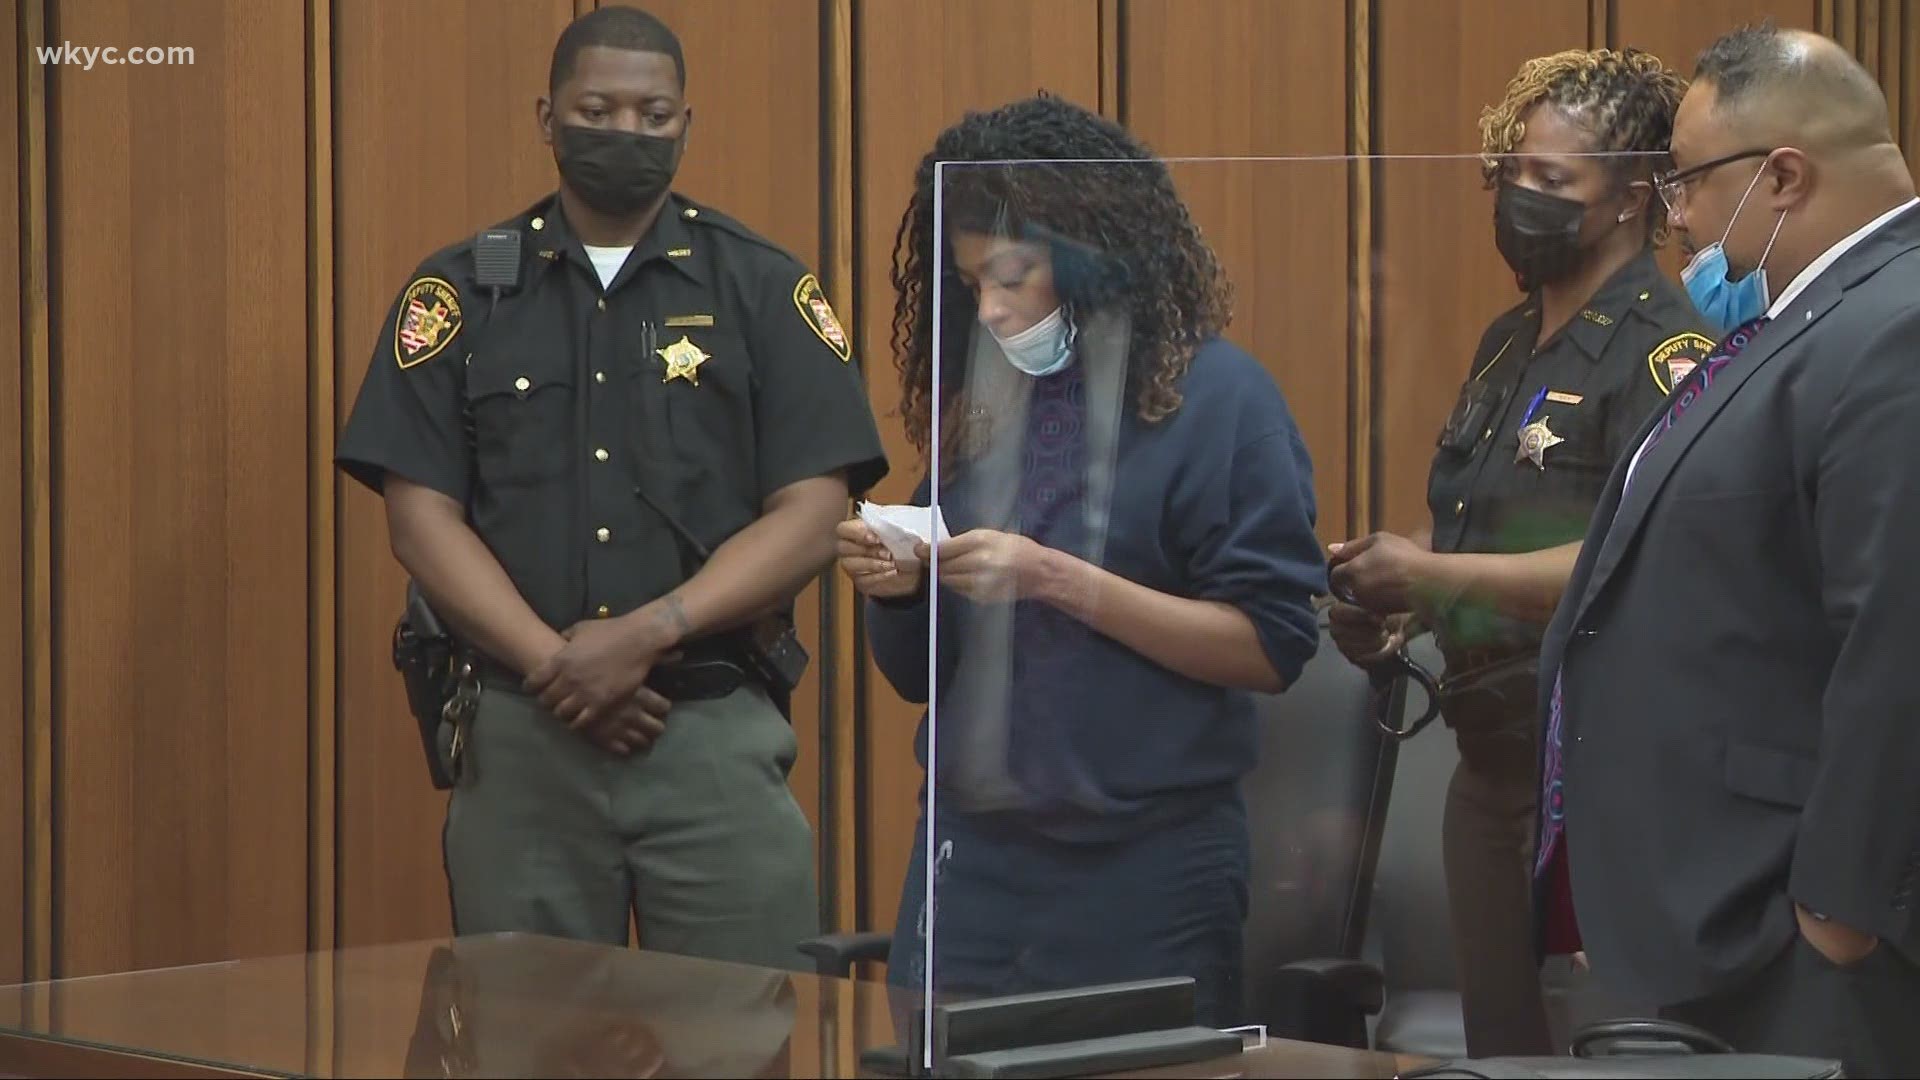 Shayla Harris will not be eligible for parole until at least 9 years have been served.